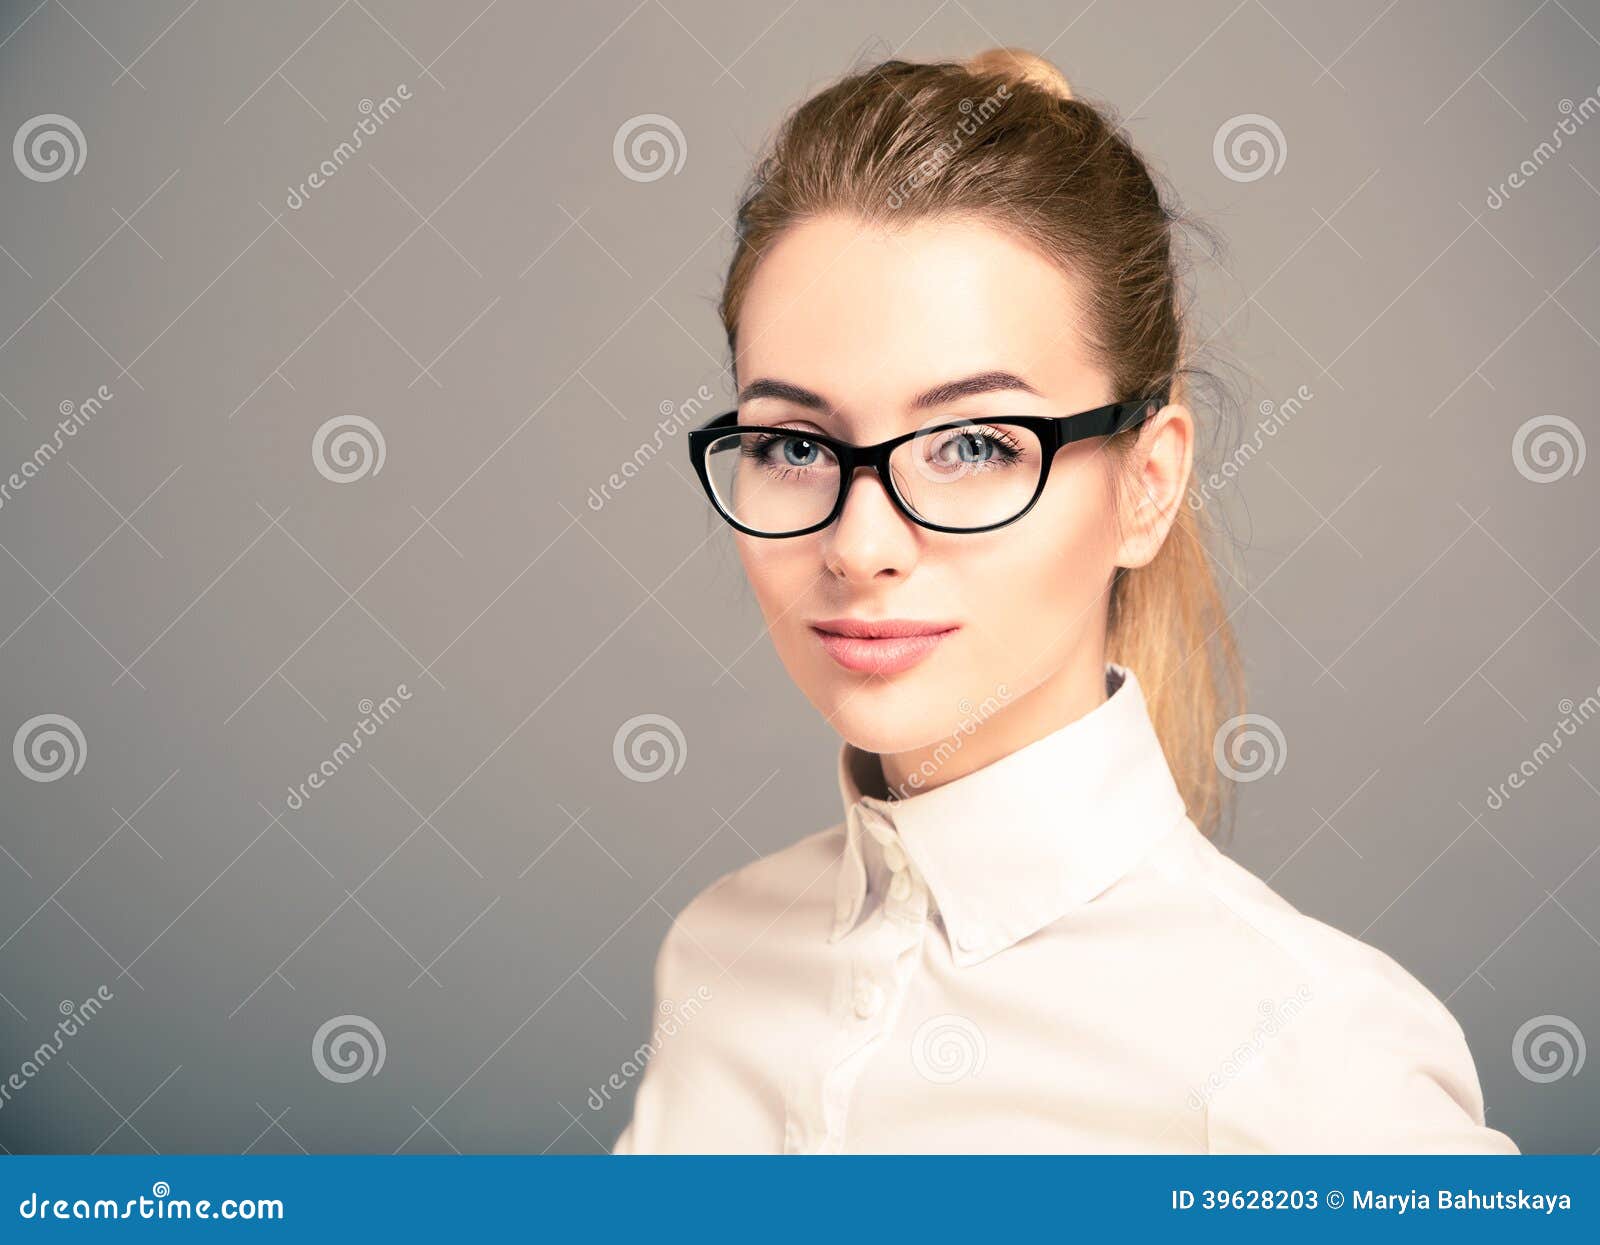 portrait of business woman wearing glasses